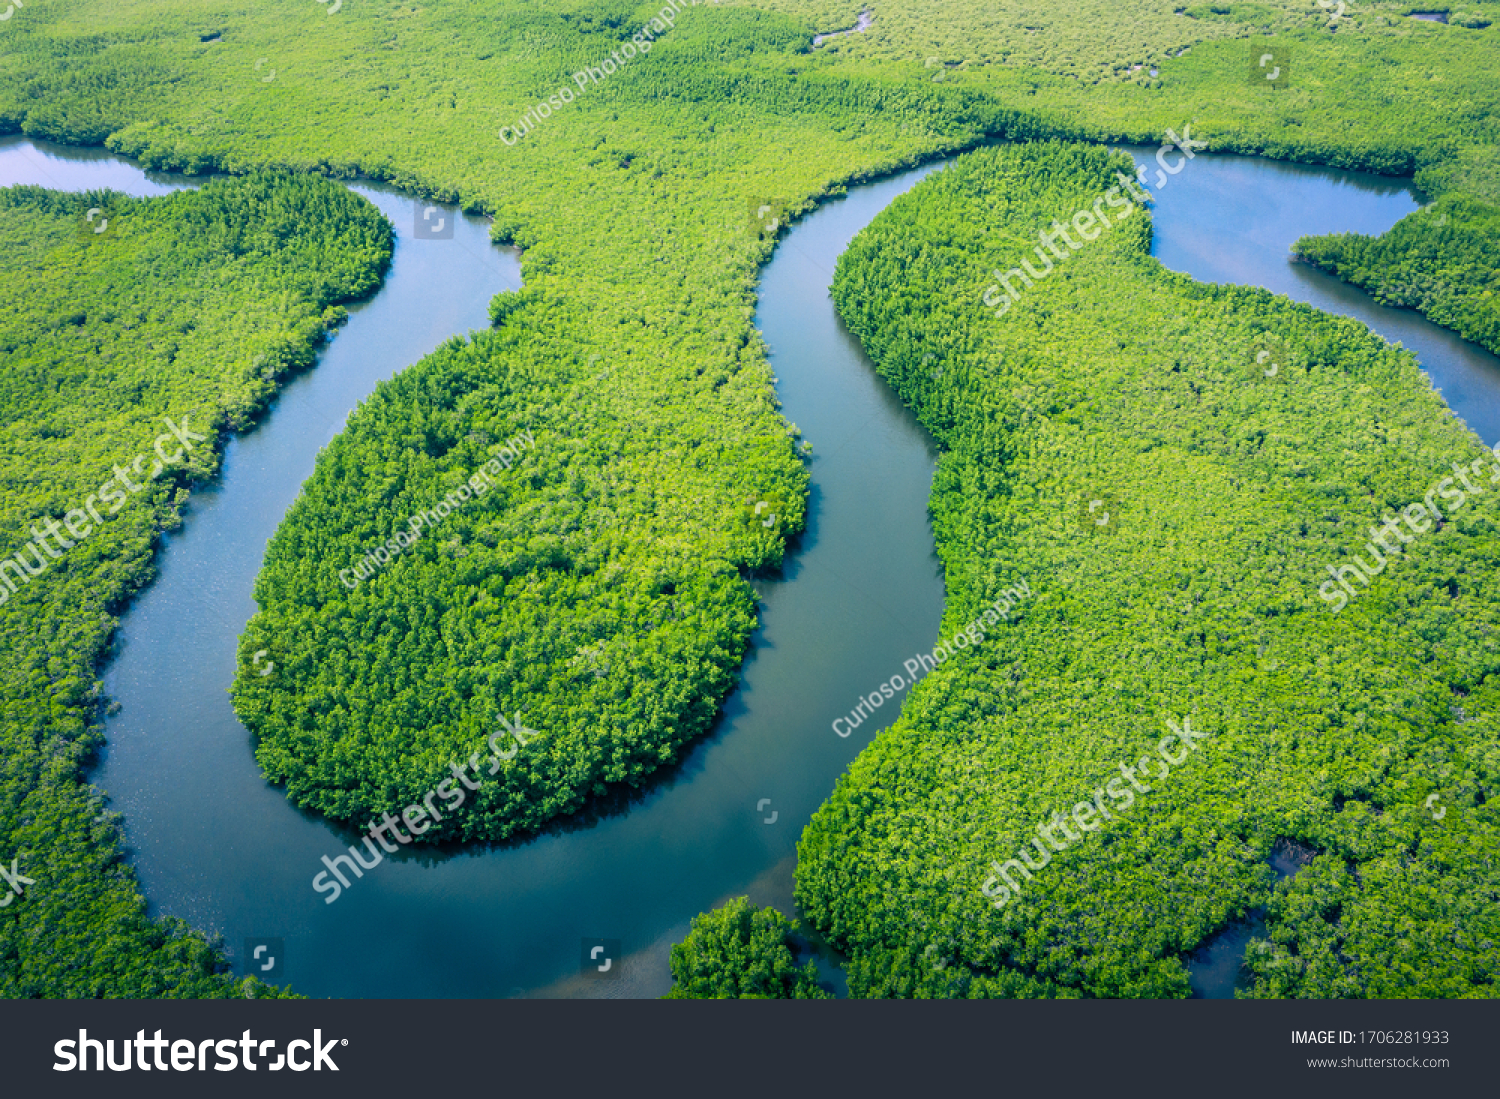 Aerial view of Amazon rainforest in Brazil, South America. Green forest. Bird's-eye view.  #1706281933